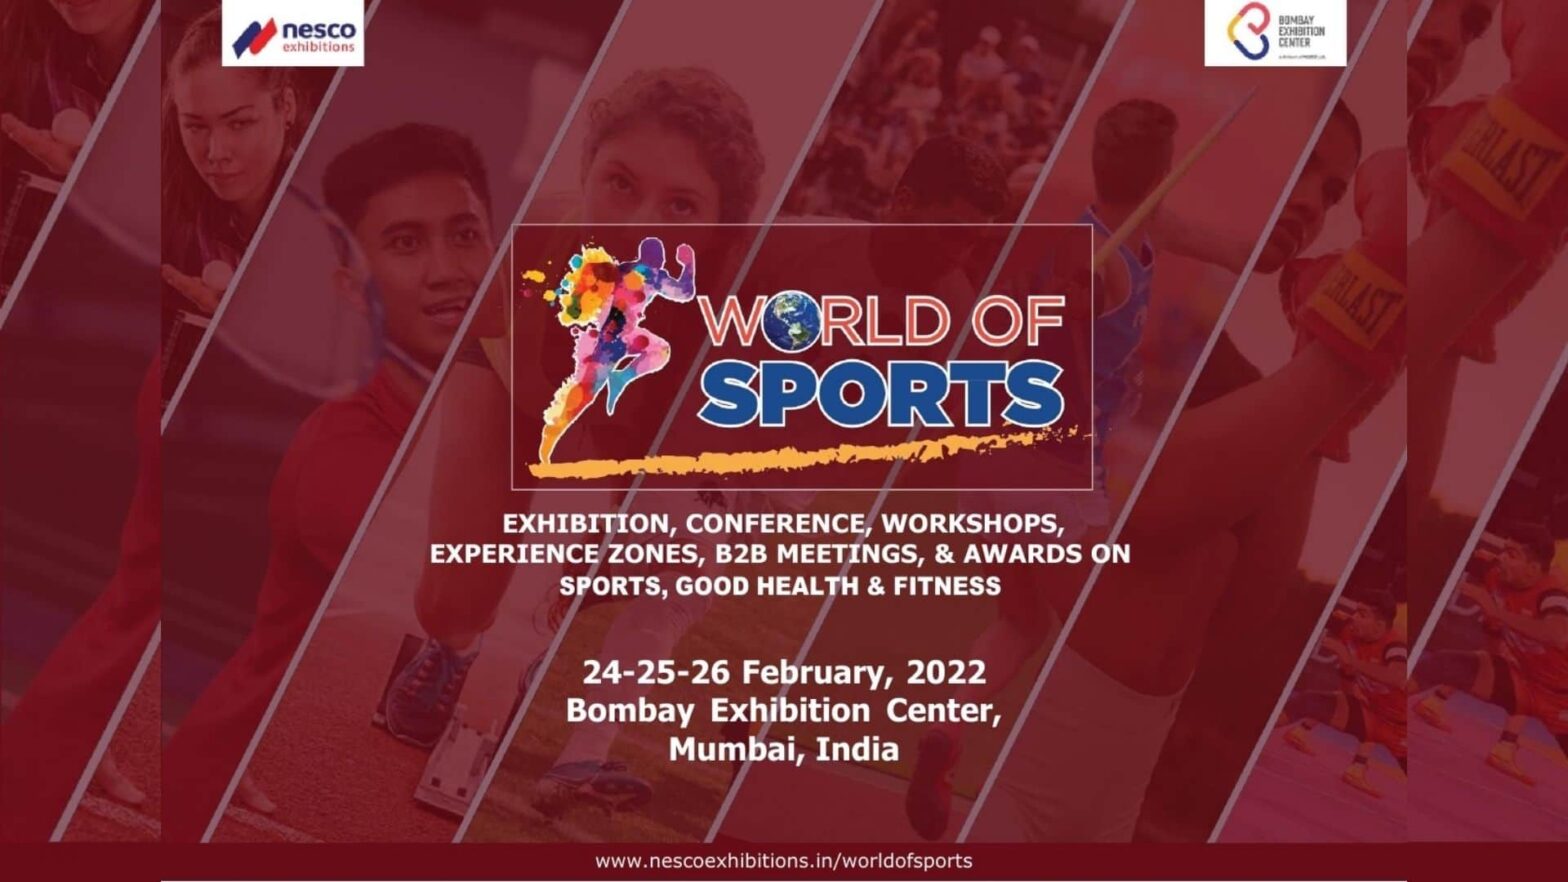 Nesco Partners With The SportsGrail For World Of Sports International Exhibition And Conference On Sports